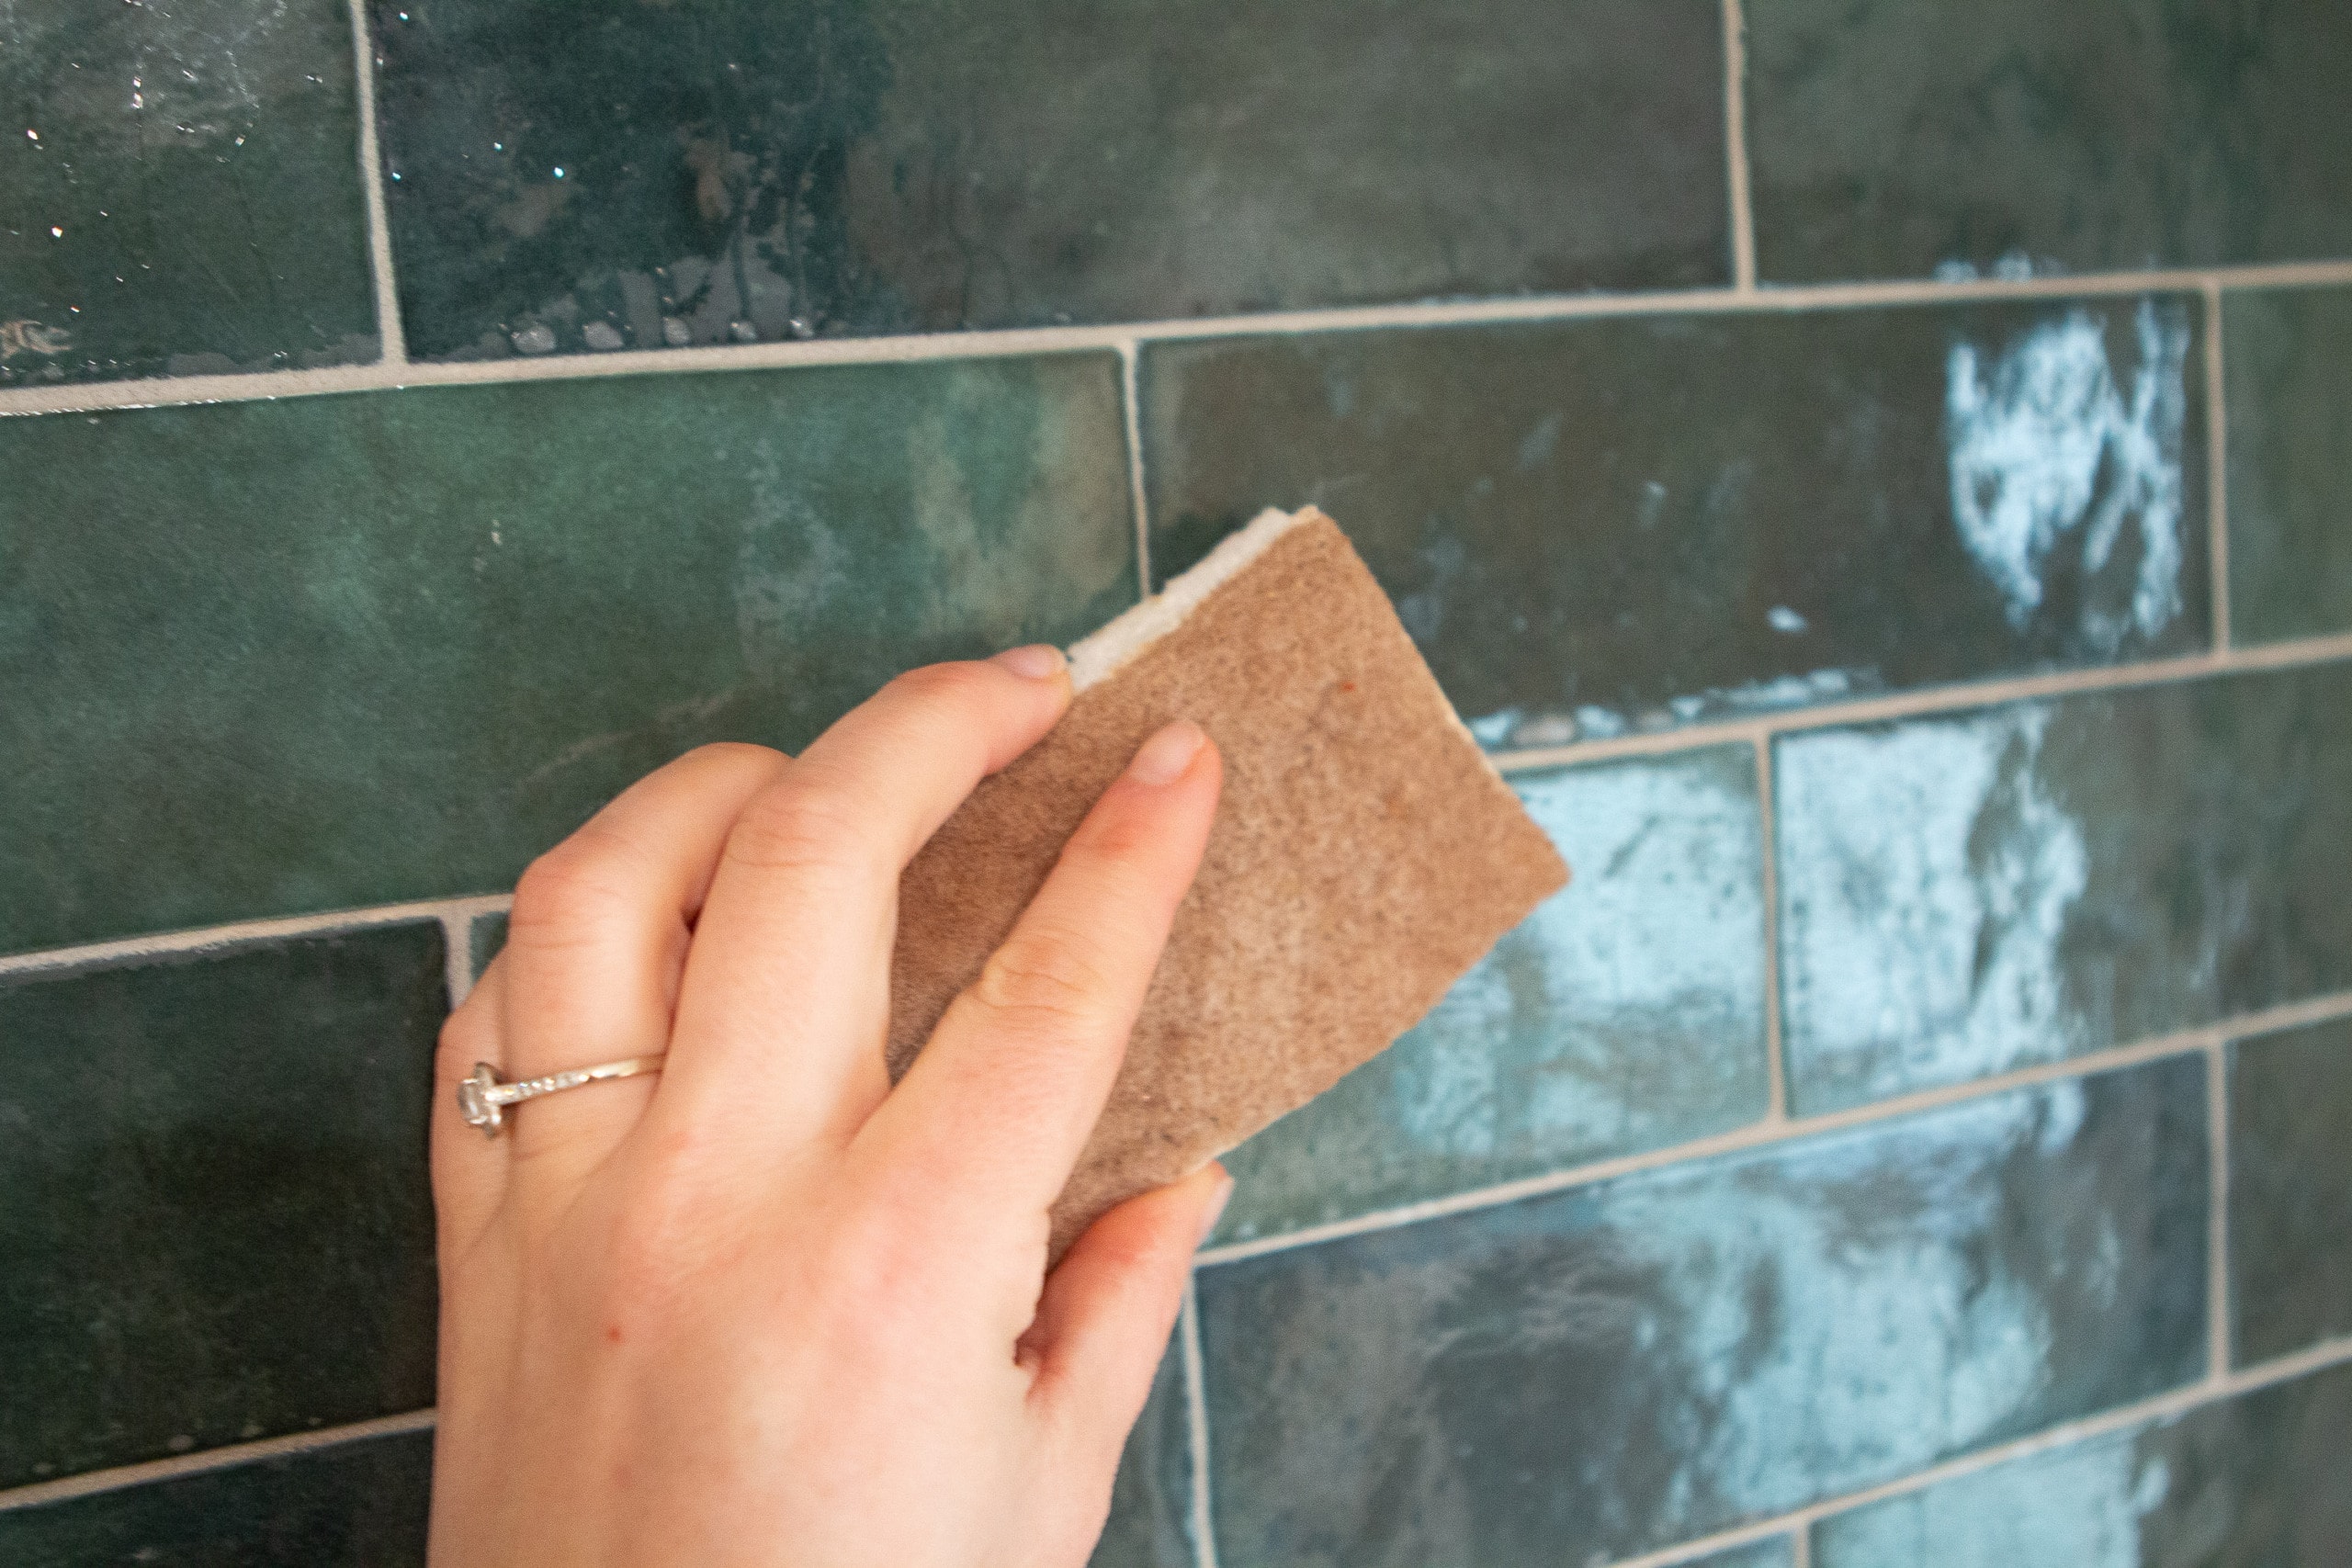 Use a sponge to put solution on the tile to remove grout haze